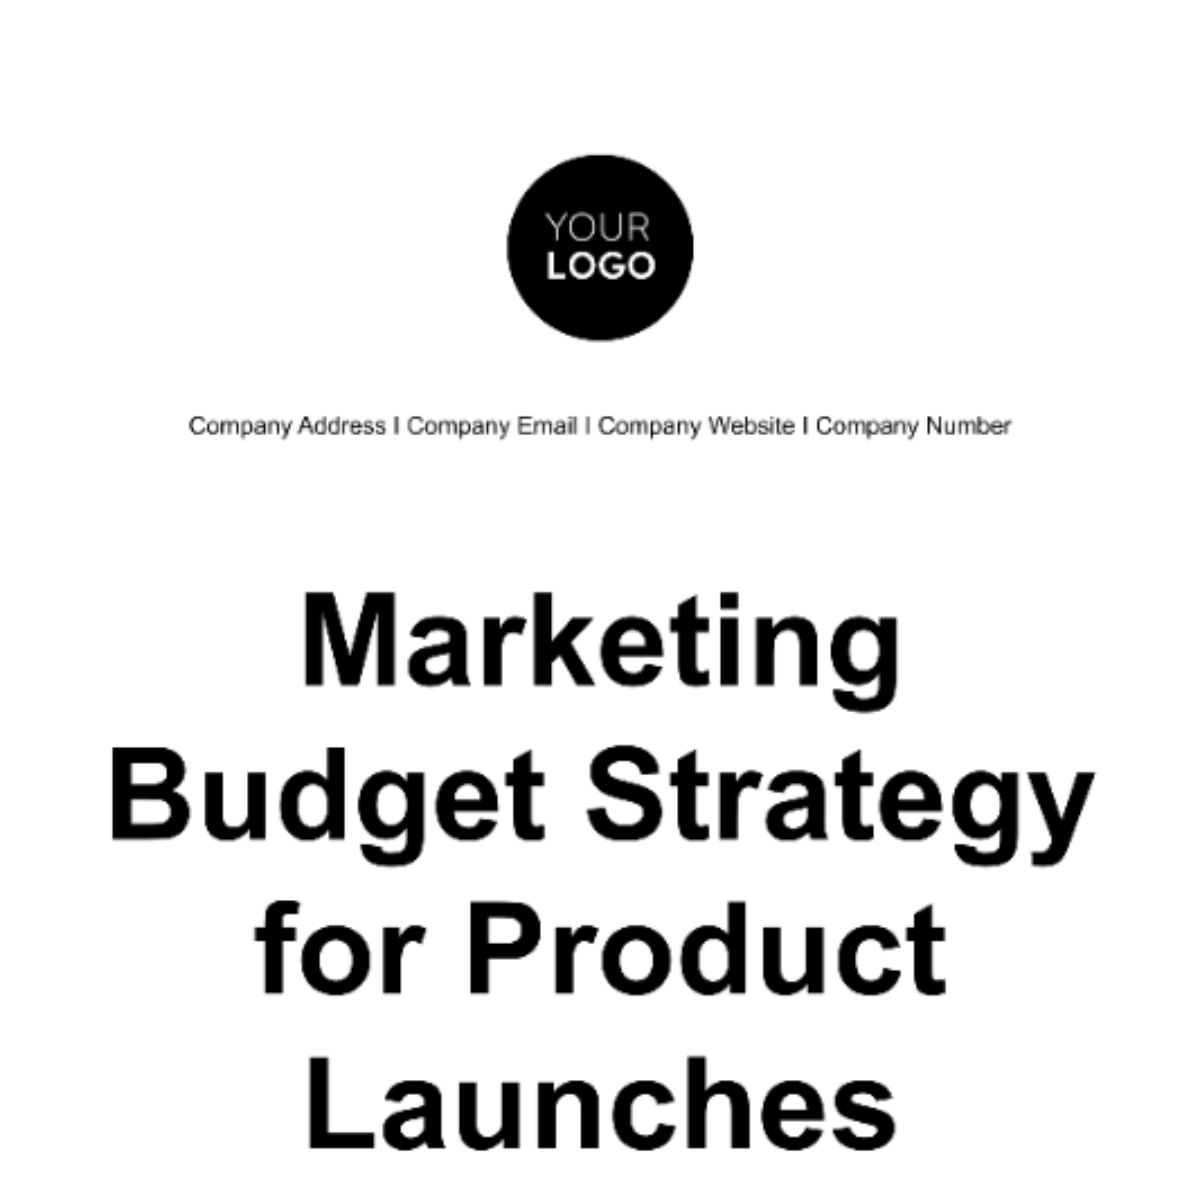 Marketing Budget Strategy for Product Launches Template